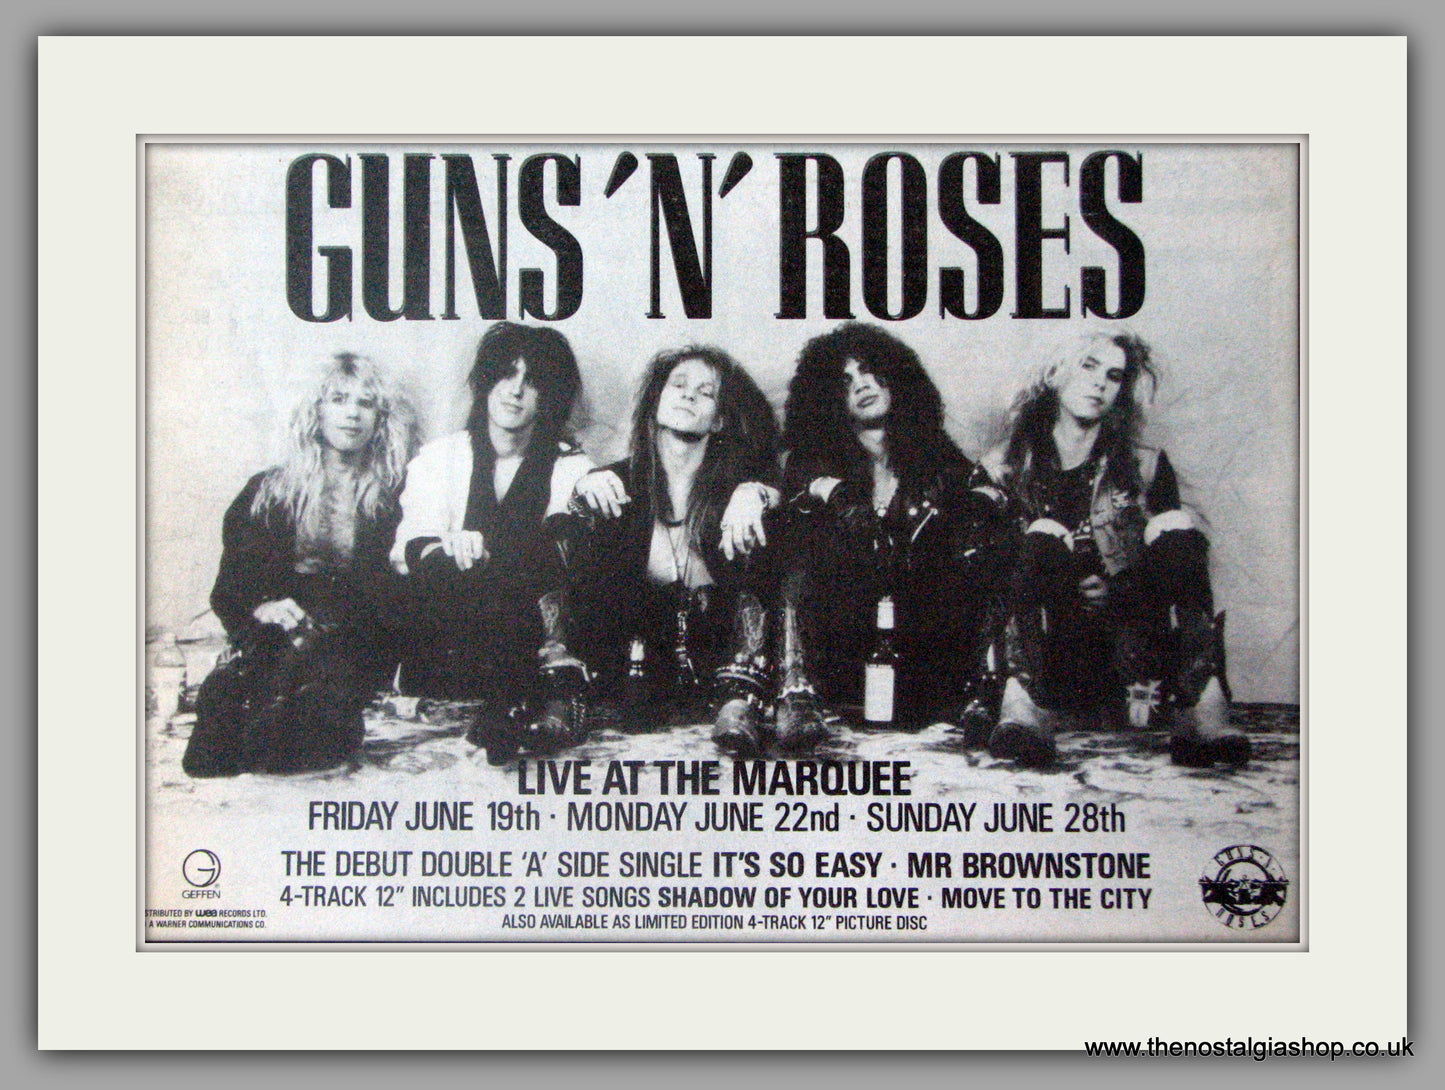 Guns 'N' Roses. Live At The Marquee. Vintage Advert 1987 (ref AD50364)